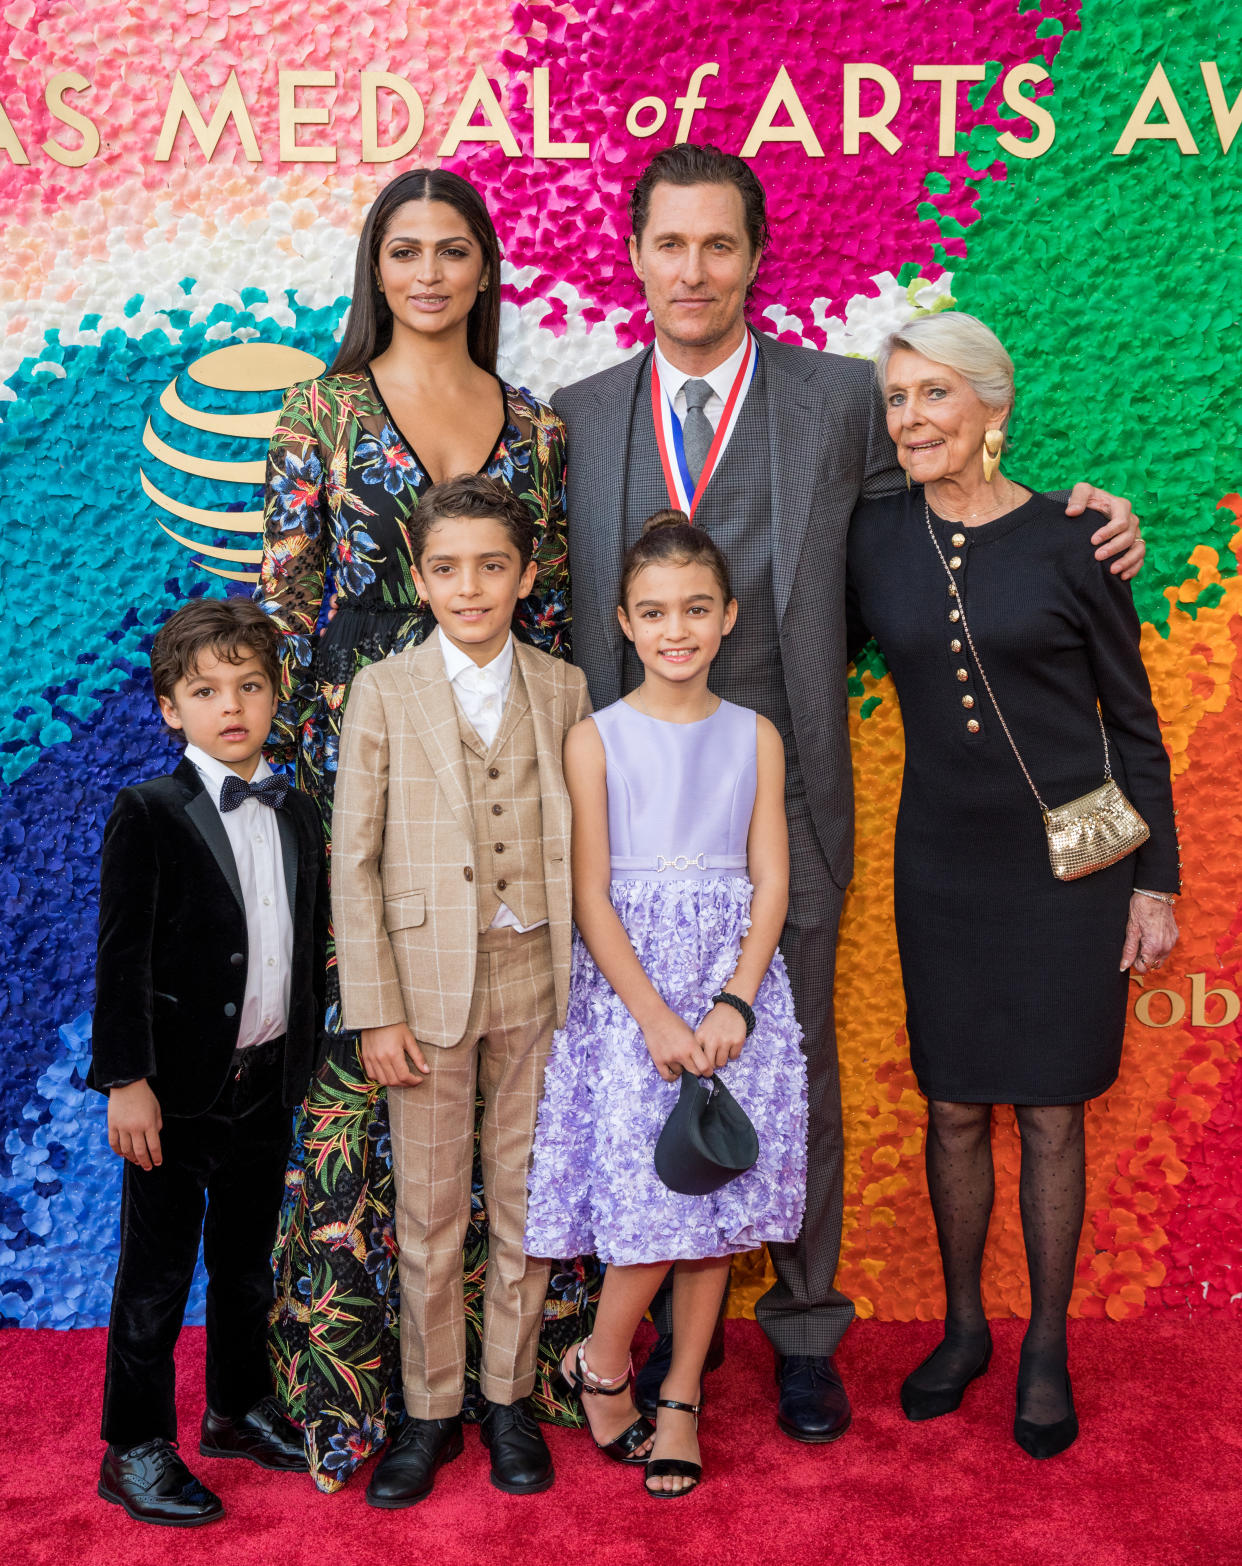 AUSTIN, TEXAS - FEBRUARY 27: (L-R) Livingston Alves McConaughey, Camila Alves, Levi Alves McConaughey, honoree Matthew McConaughey, Vida Alves McConaughey, and Kay McConaughey attend the 2019 Texas Medal Of Arts Awards at the Long Center for the Performing Arts on February 27, 2019 in Austin, Texas. (Photo by Rick Kern/WireImage)